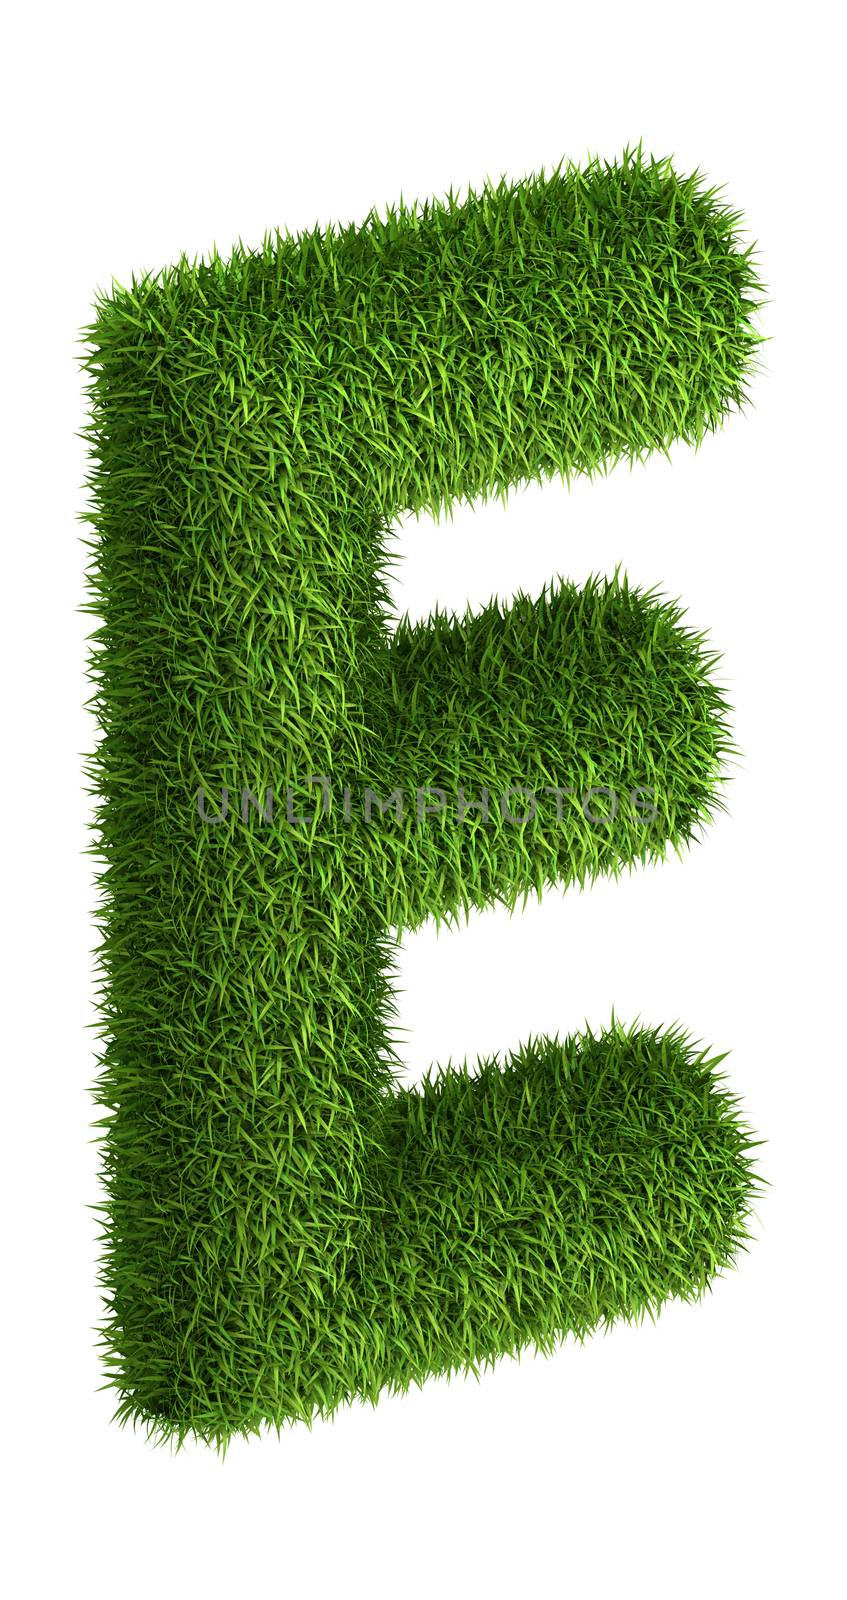 3D Letter E photo realistic isometric projection grass ecology theme on white